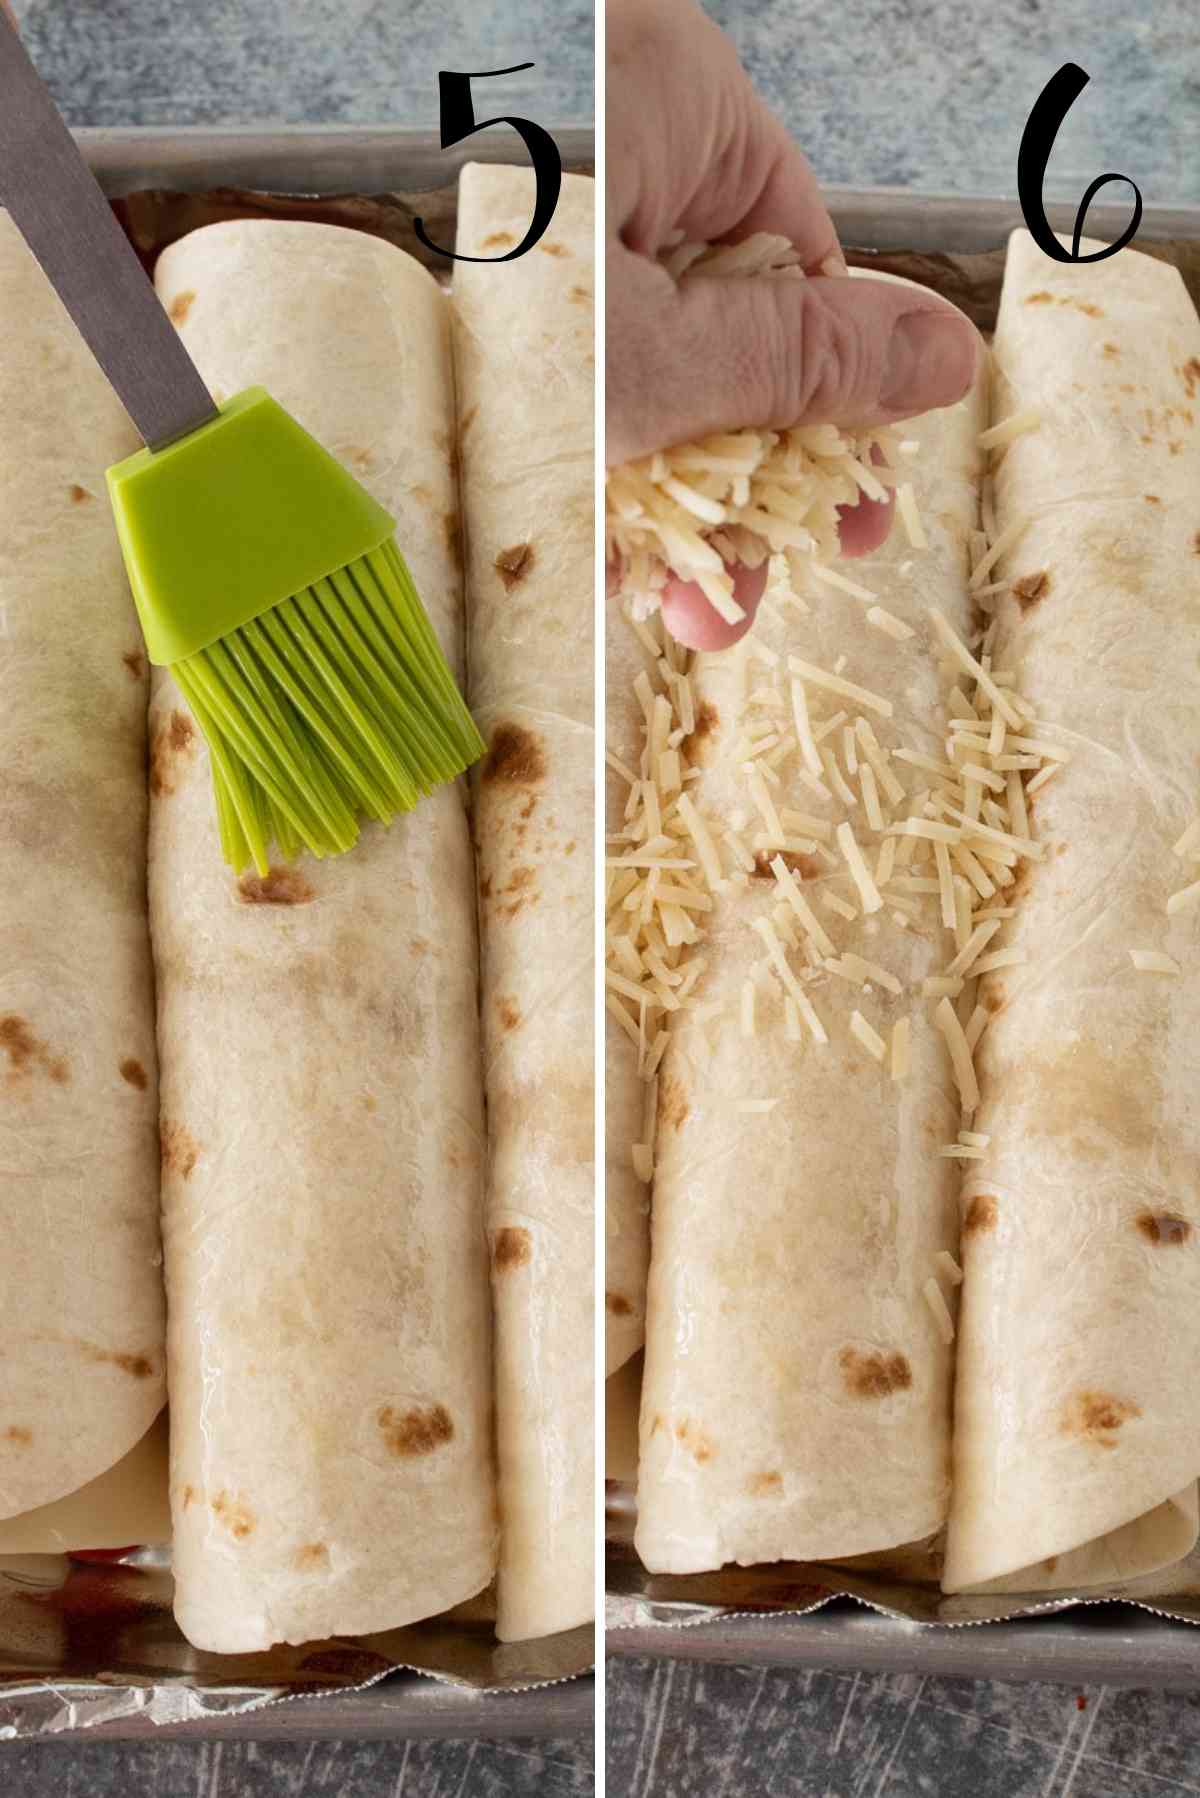 Rolled tortillas in a baking pan brushed with olive oil and sprinkled with parmesan.